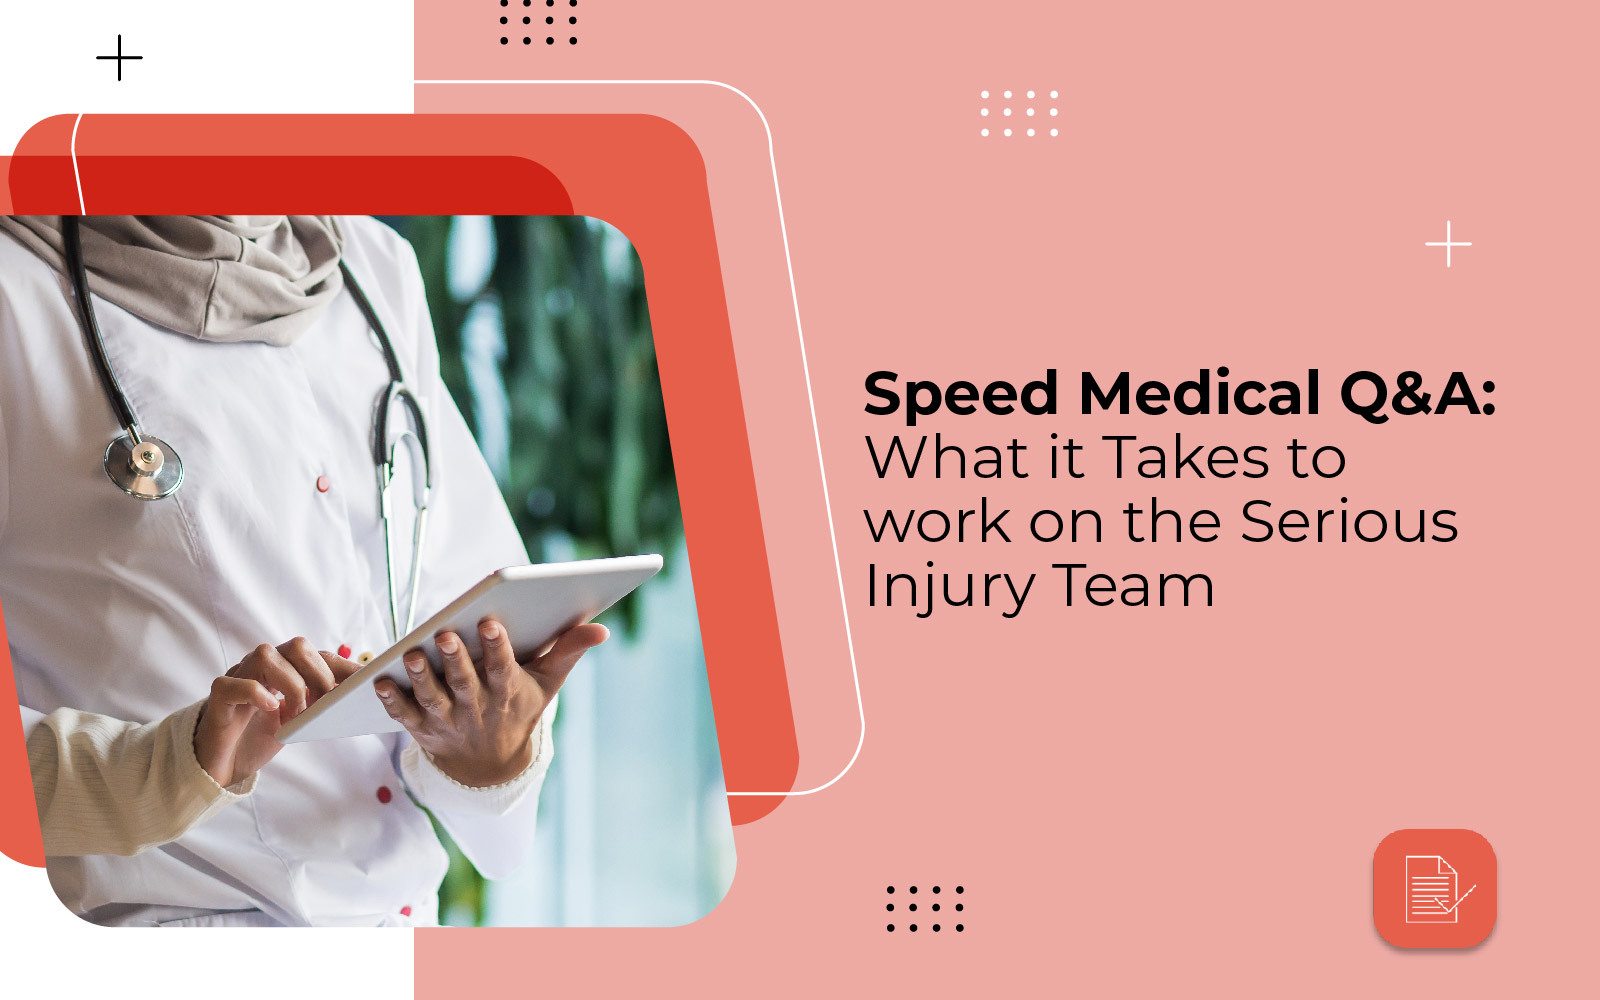 Speed Medical Q&A: What it Takes to Work on the Serious Injury Team